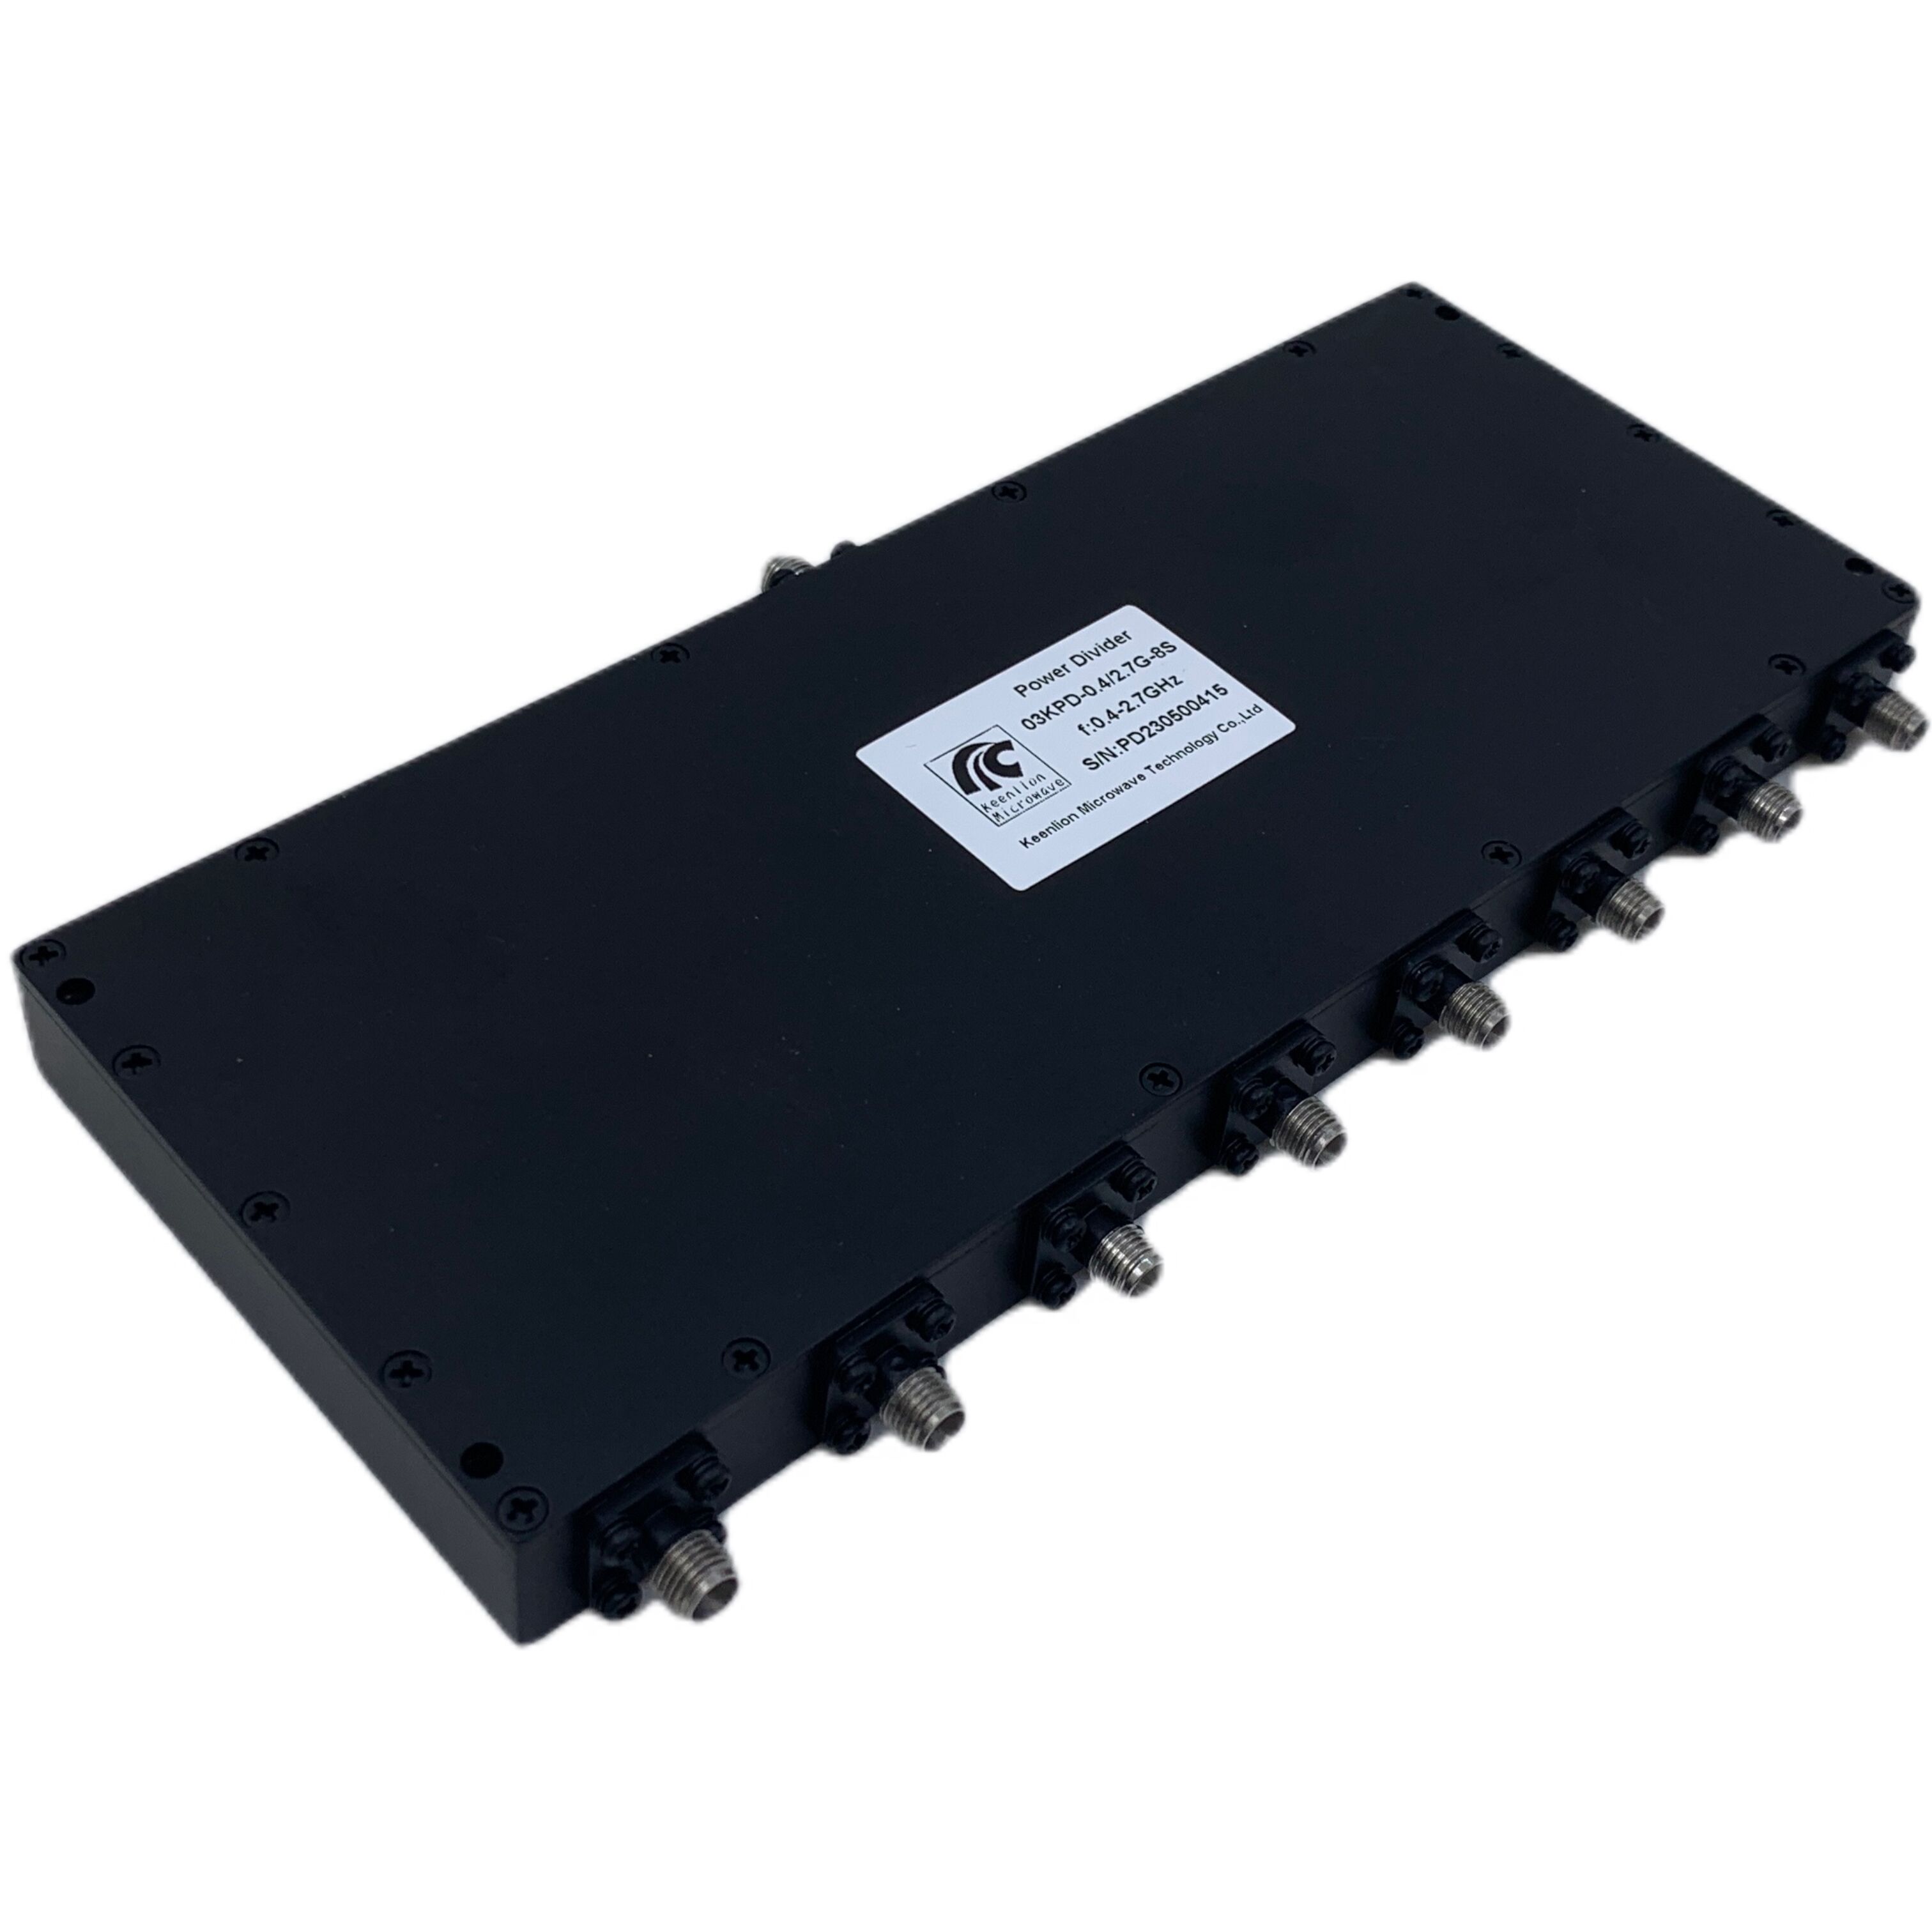 Keenlion’s 8 Way 400MHz-2700MHz Power Divider: Enhancing Wireless Communication Networks